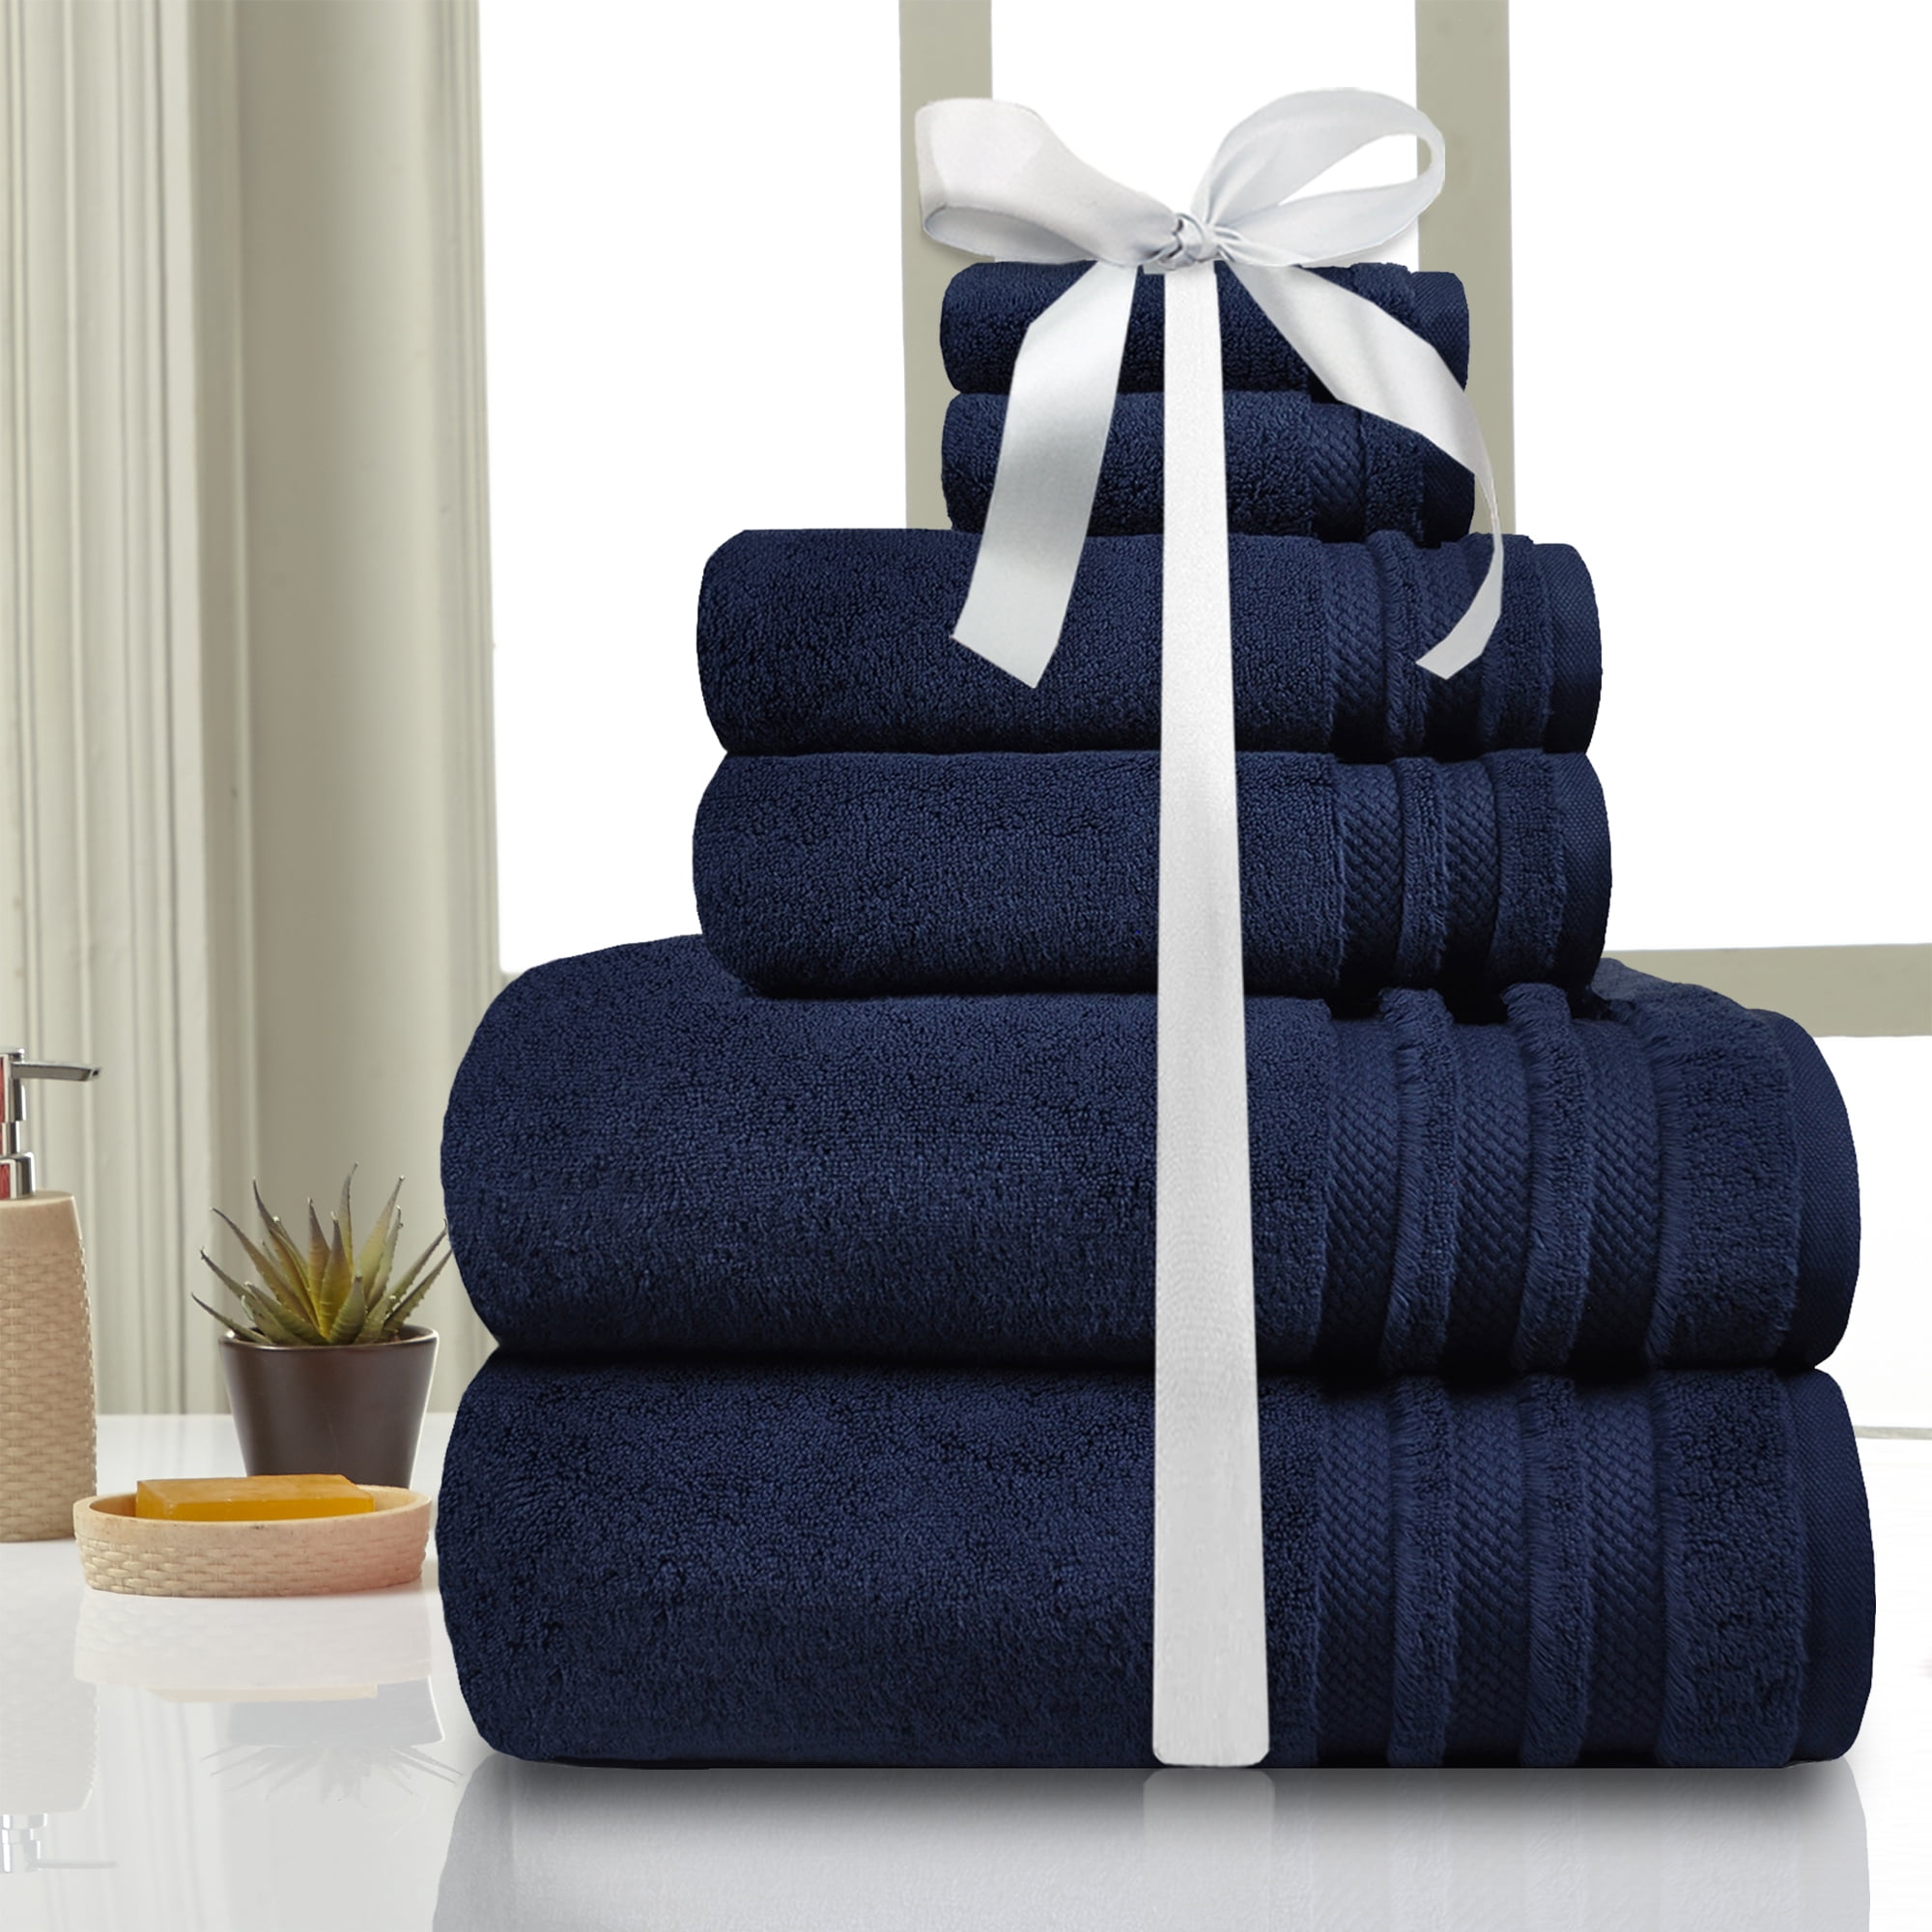  TRIDENT Towels Set of 3, 1 Bath Towel, 1 Hand Towel, 1 Wash  Cloth, Premium 100% Pure Indian Cotton, Ultra Soft Highly Absorbent Towel  Set for Bathroom, Gym, Hotel and Spa